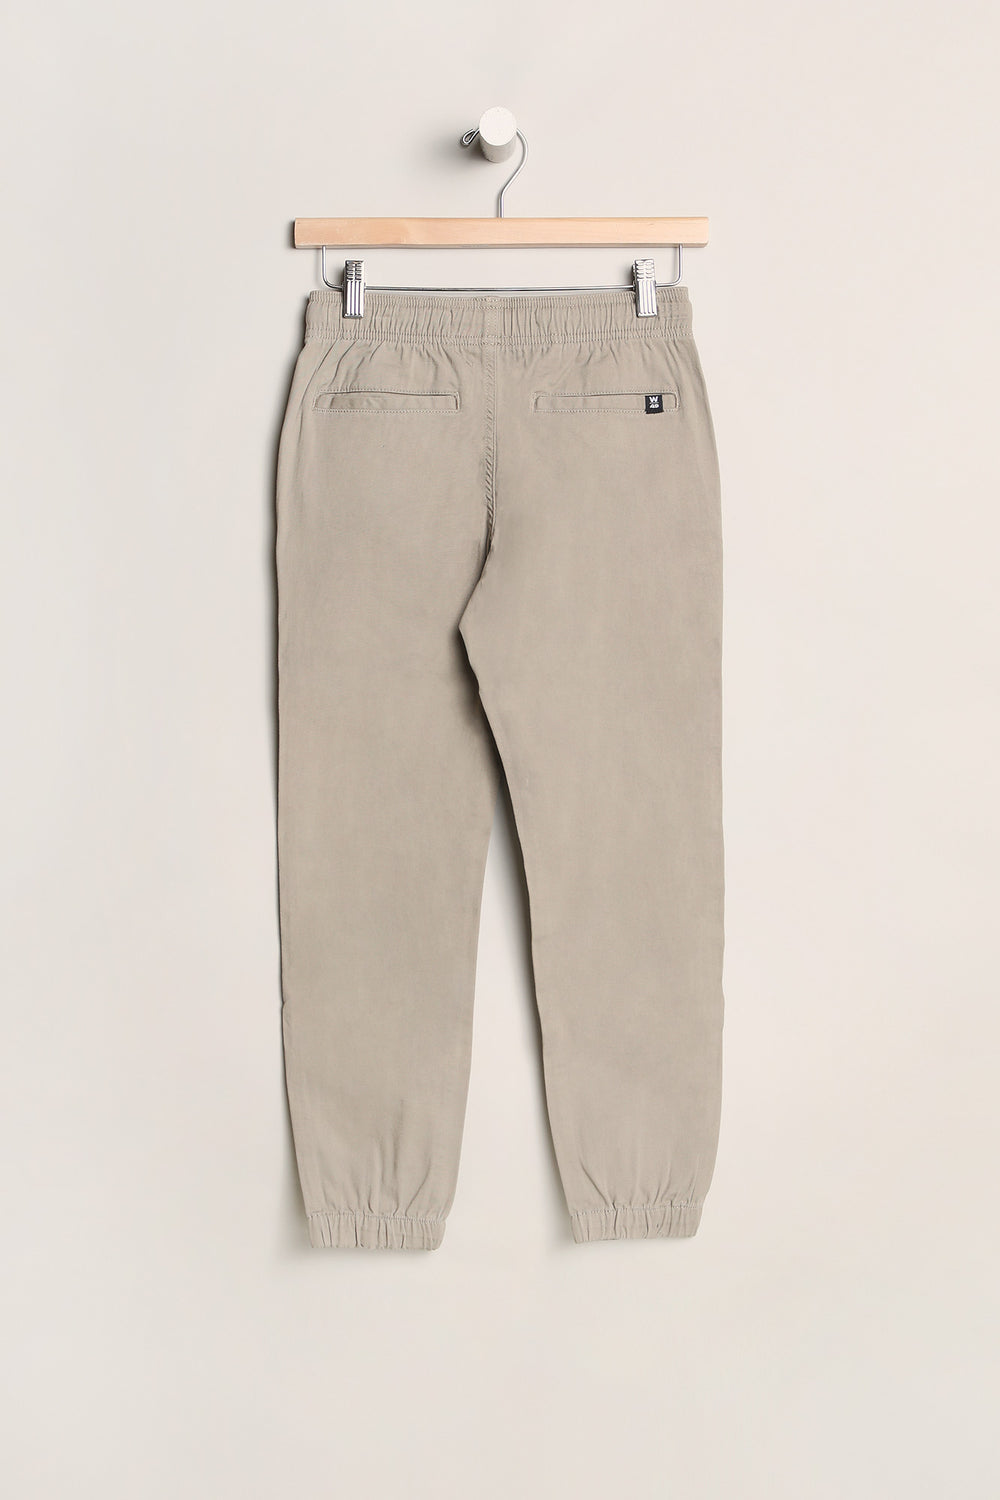 West49 Youth Slim Twill Jogger Sand